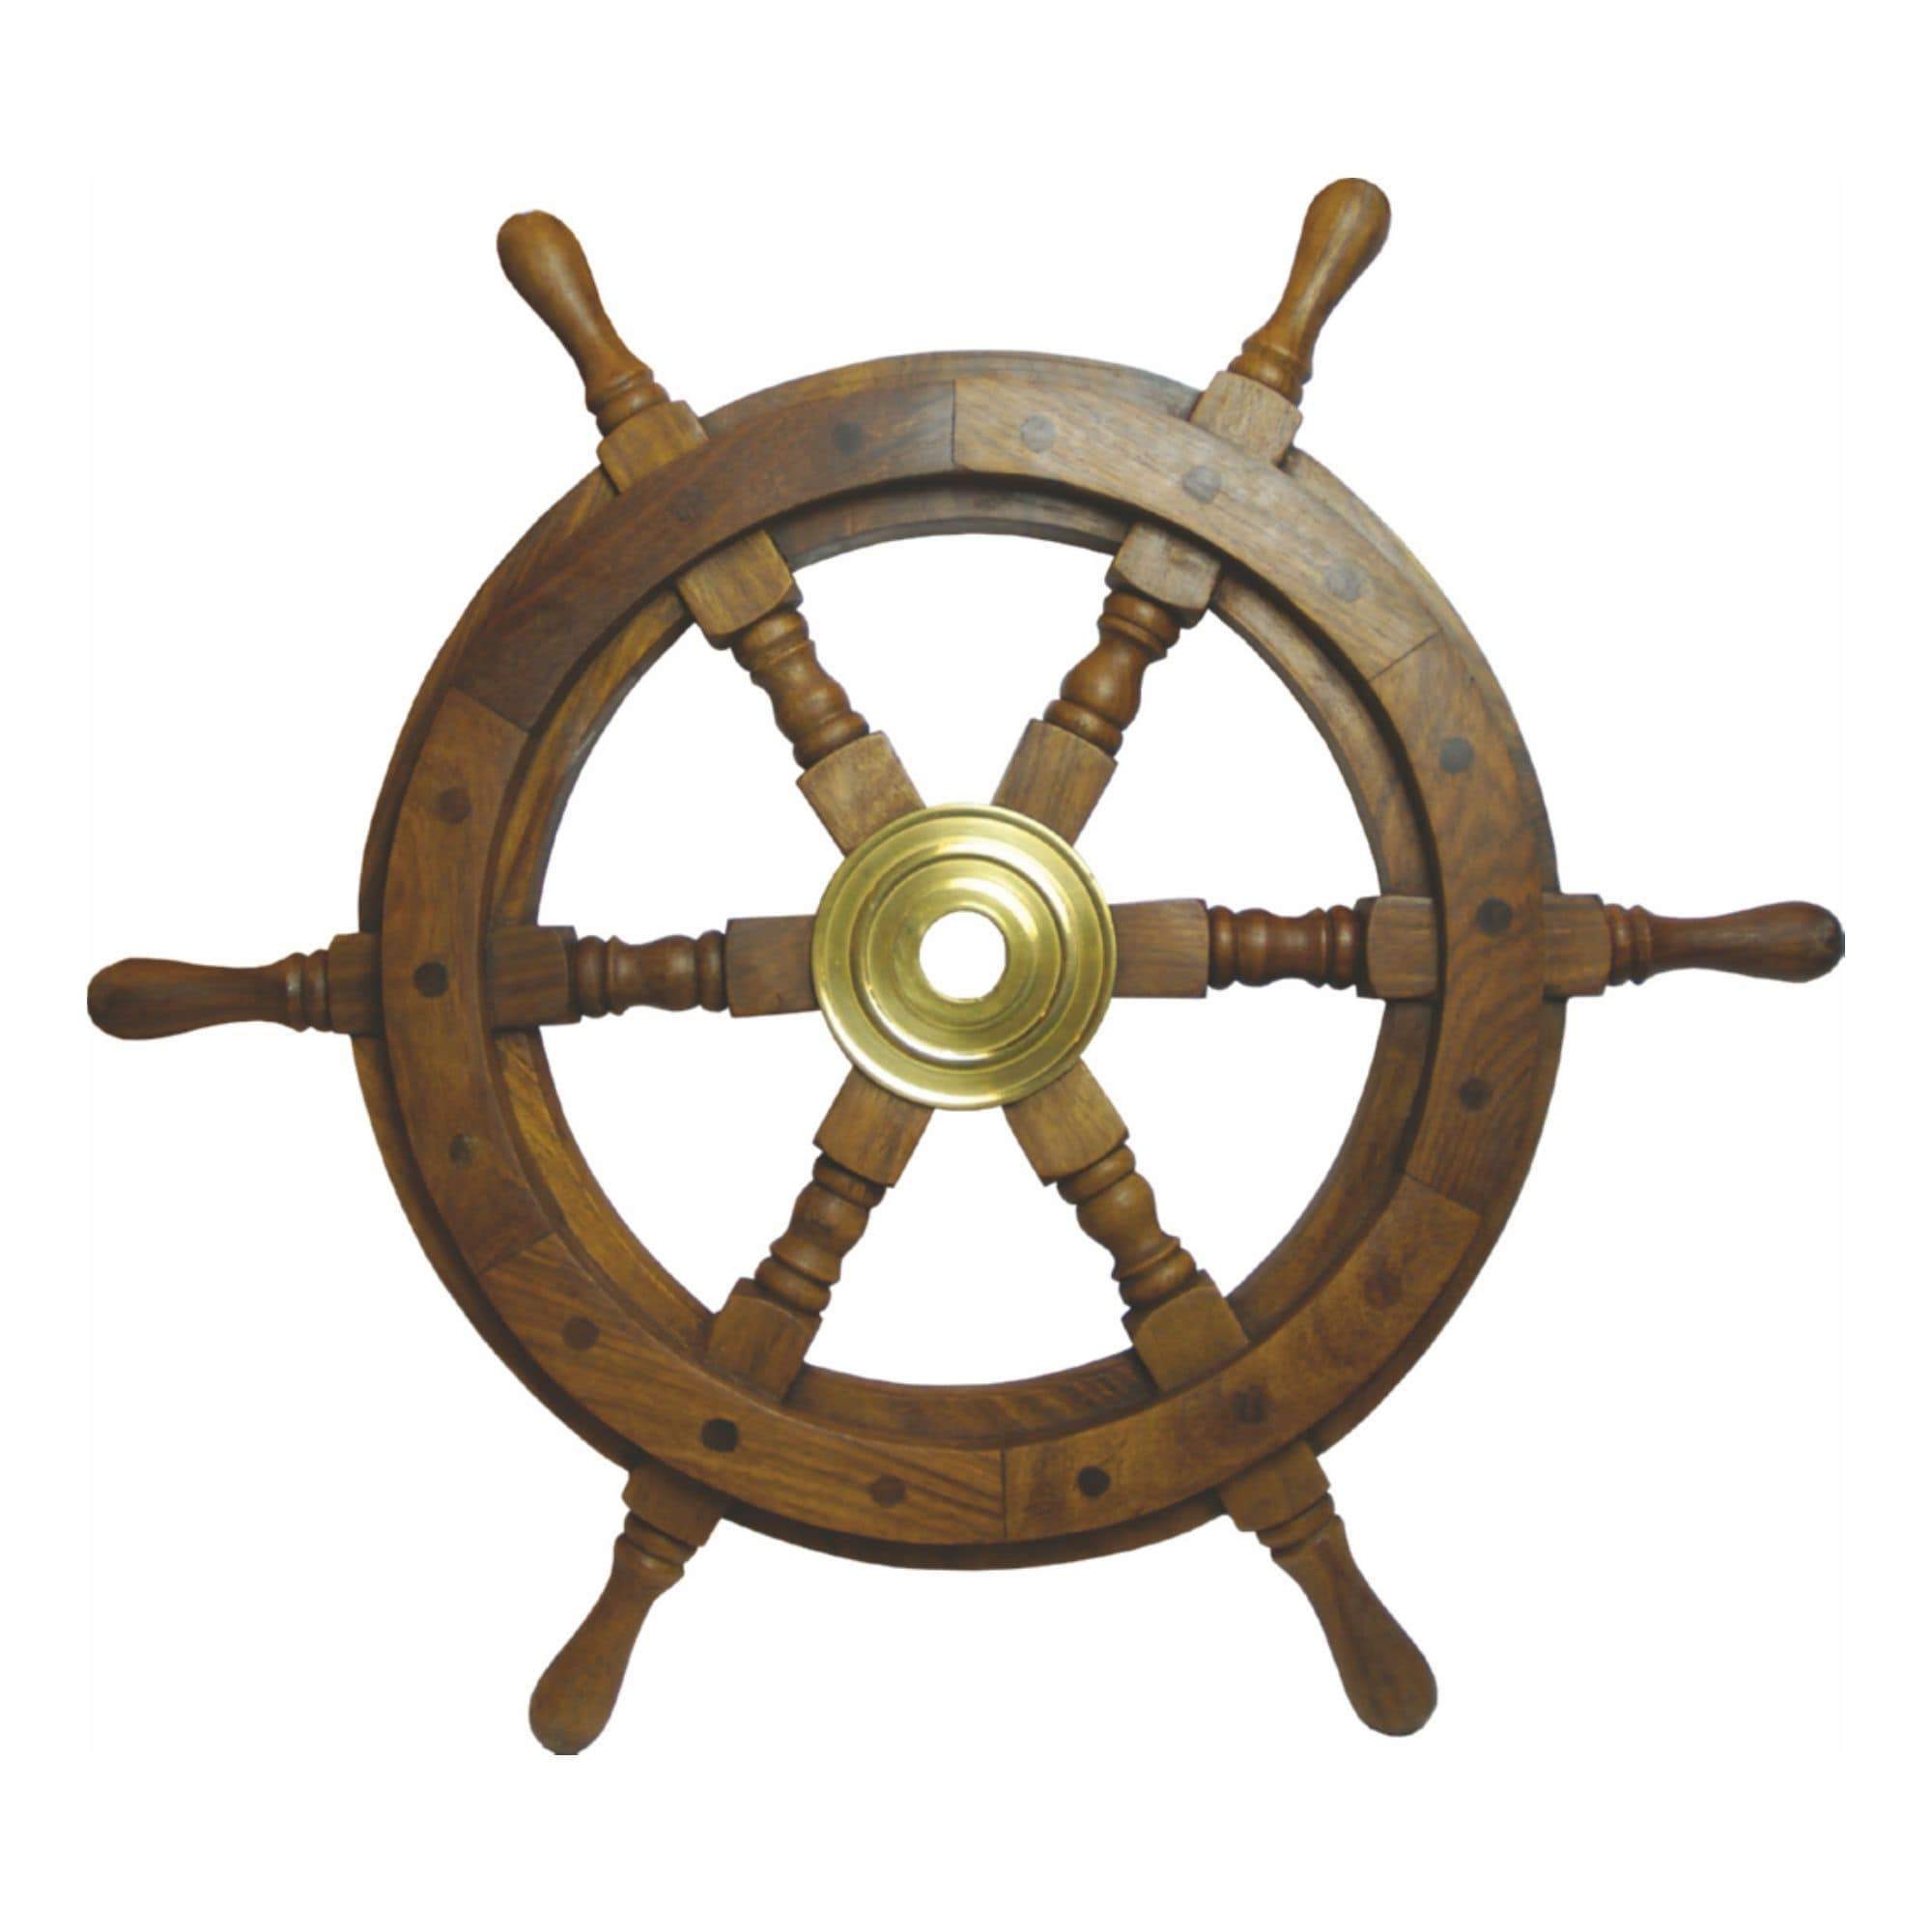 Wooden Ships Wheel – Large Size